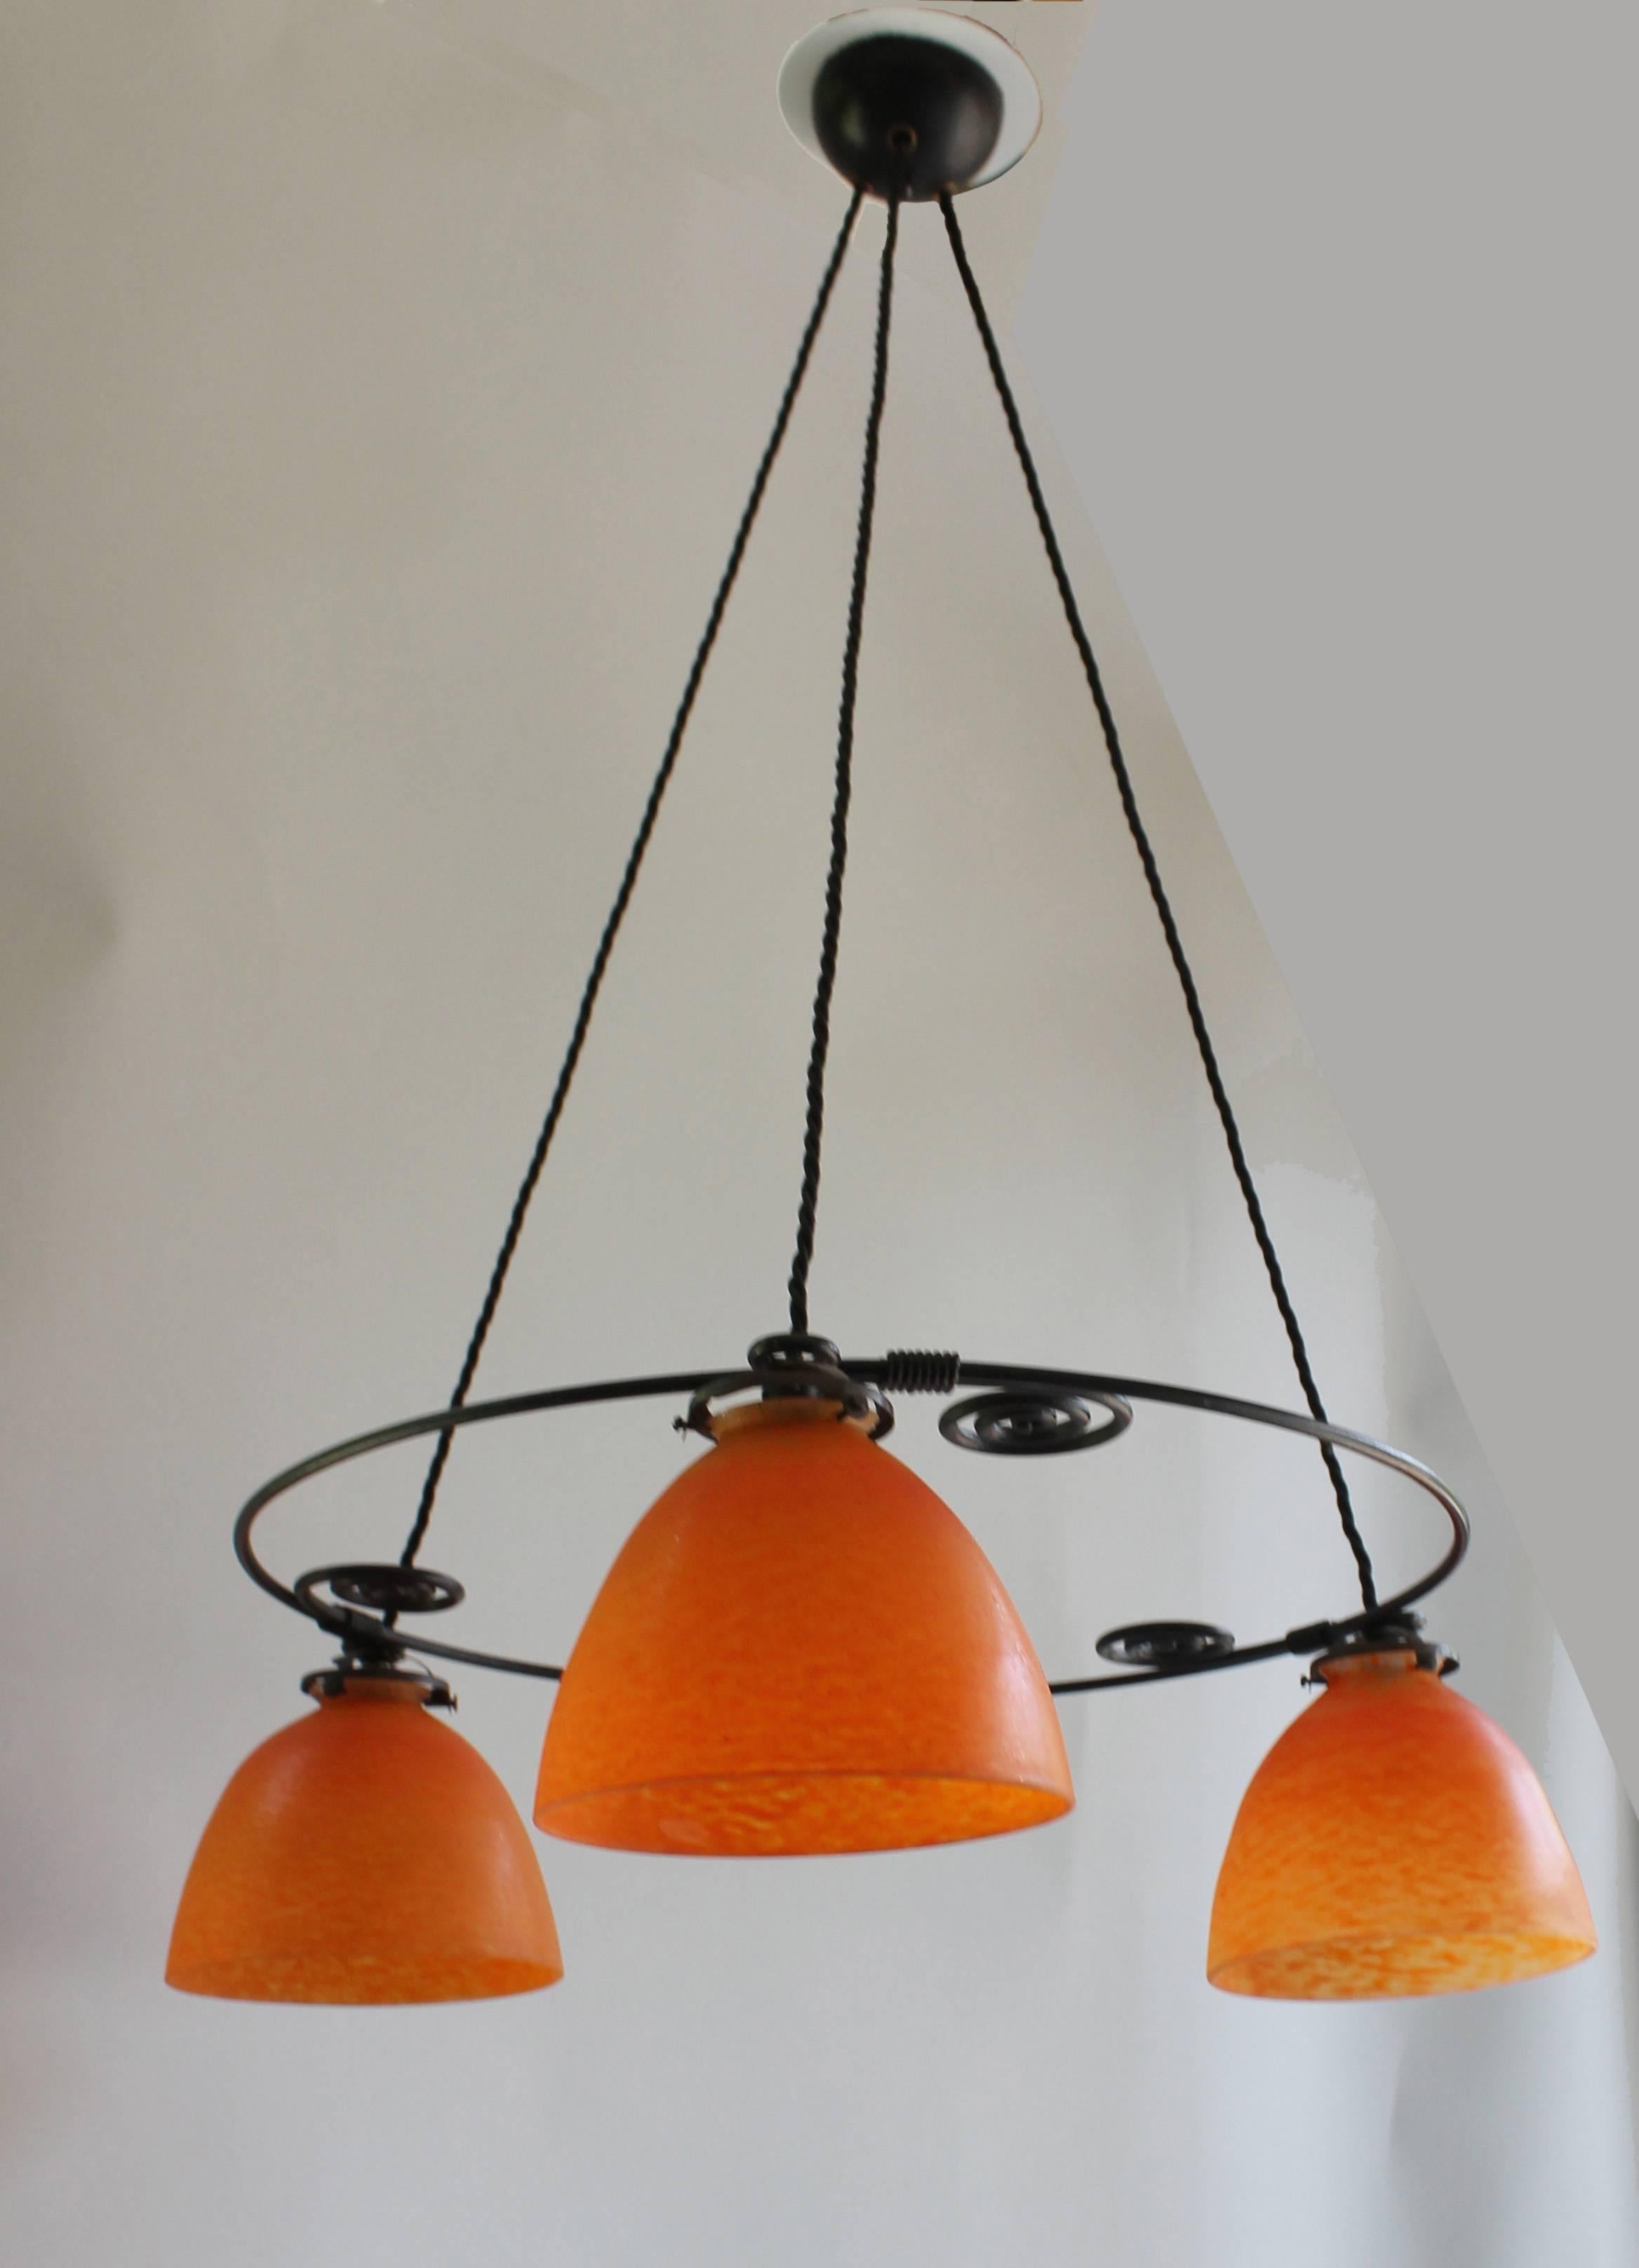 A pair of wrought iron suspensions with three orange mottled glass shades, designed by Francis Jourdain (1876-1958).
Signed "FJ" on shades.

Bibliography:
"Francis Jourdain, un parcours moderne, 1876-1958 Édition d'Art Somogy,